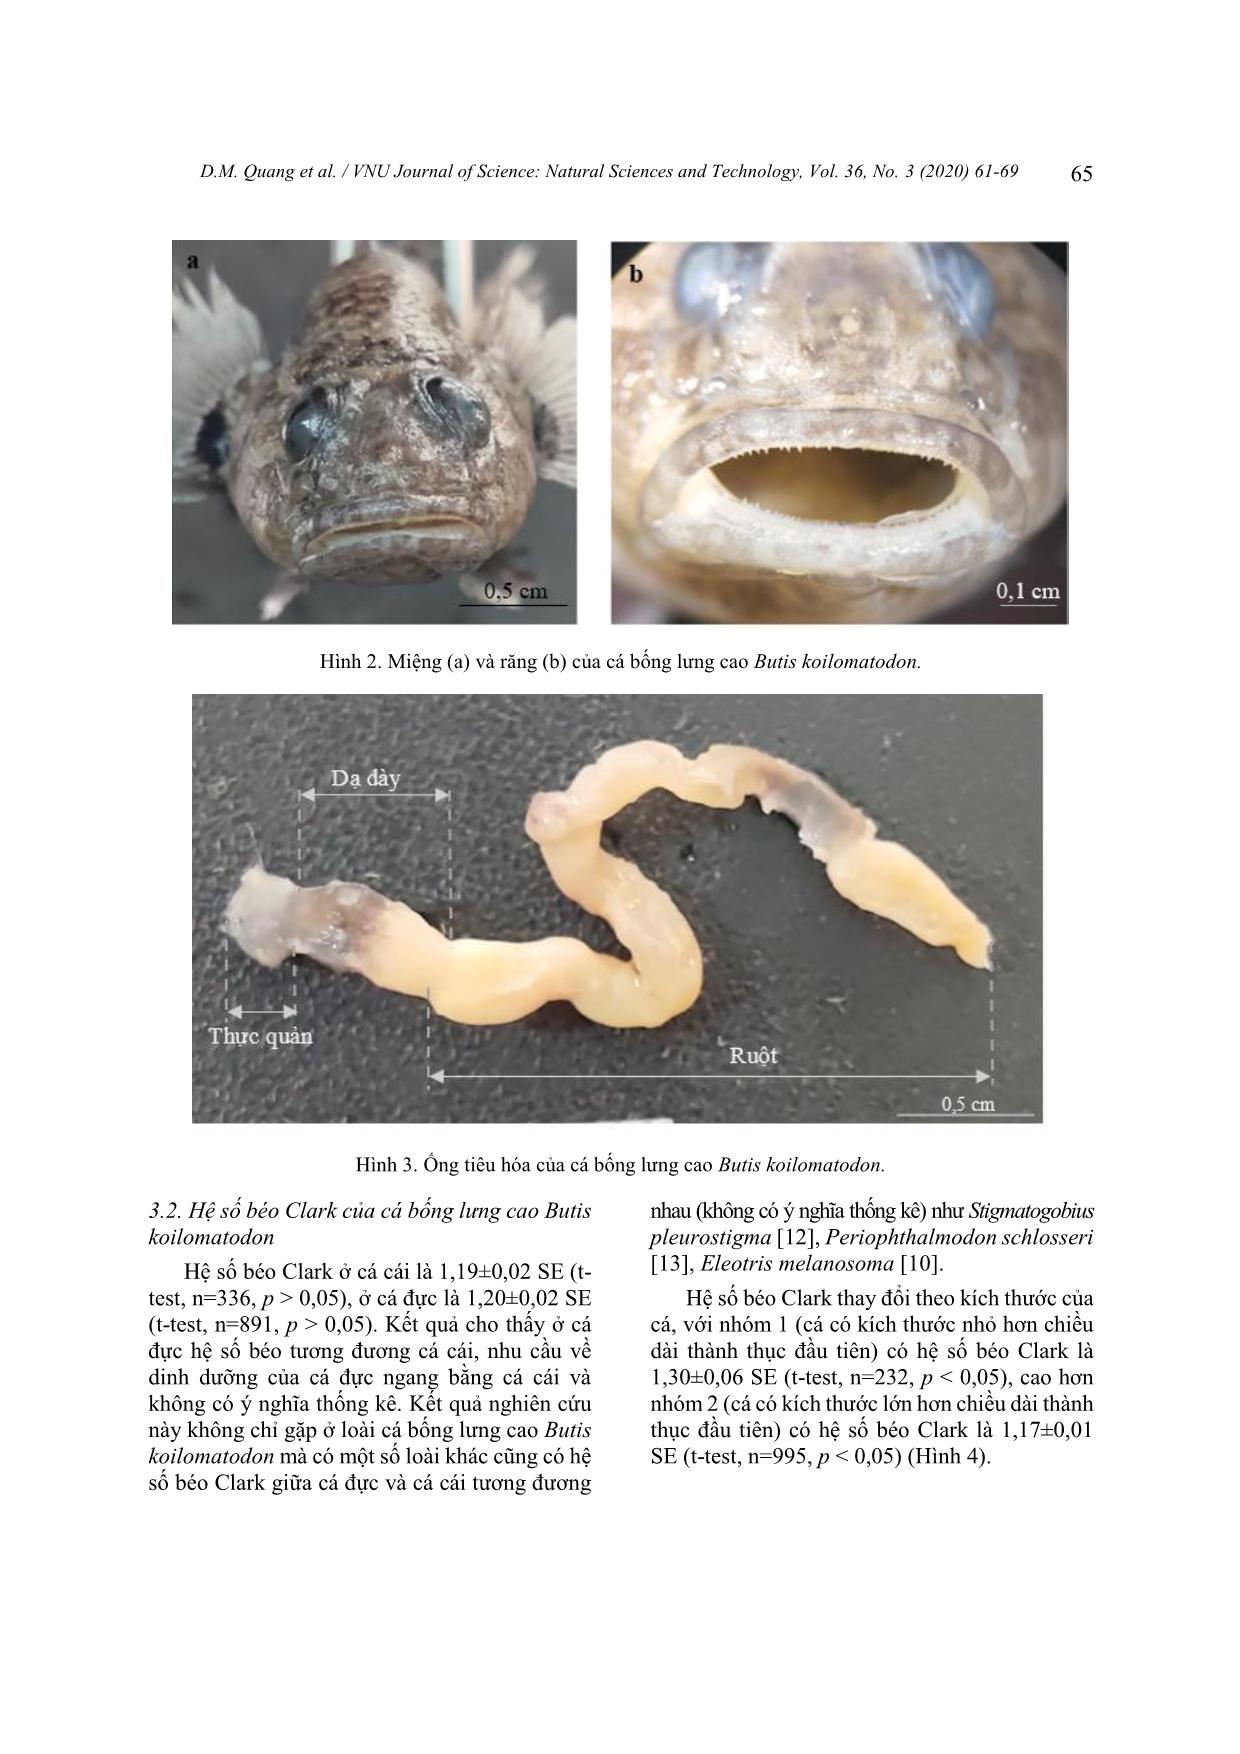 The digestive tract morphology and clark index of mud sleeper butis koilomatodon living in some coastal and estuarine areas belonging to Tra vinh, Soc trang, bac lieu and Ca Mau trang 5